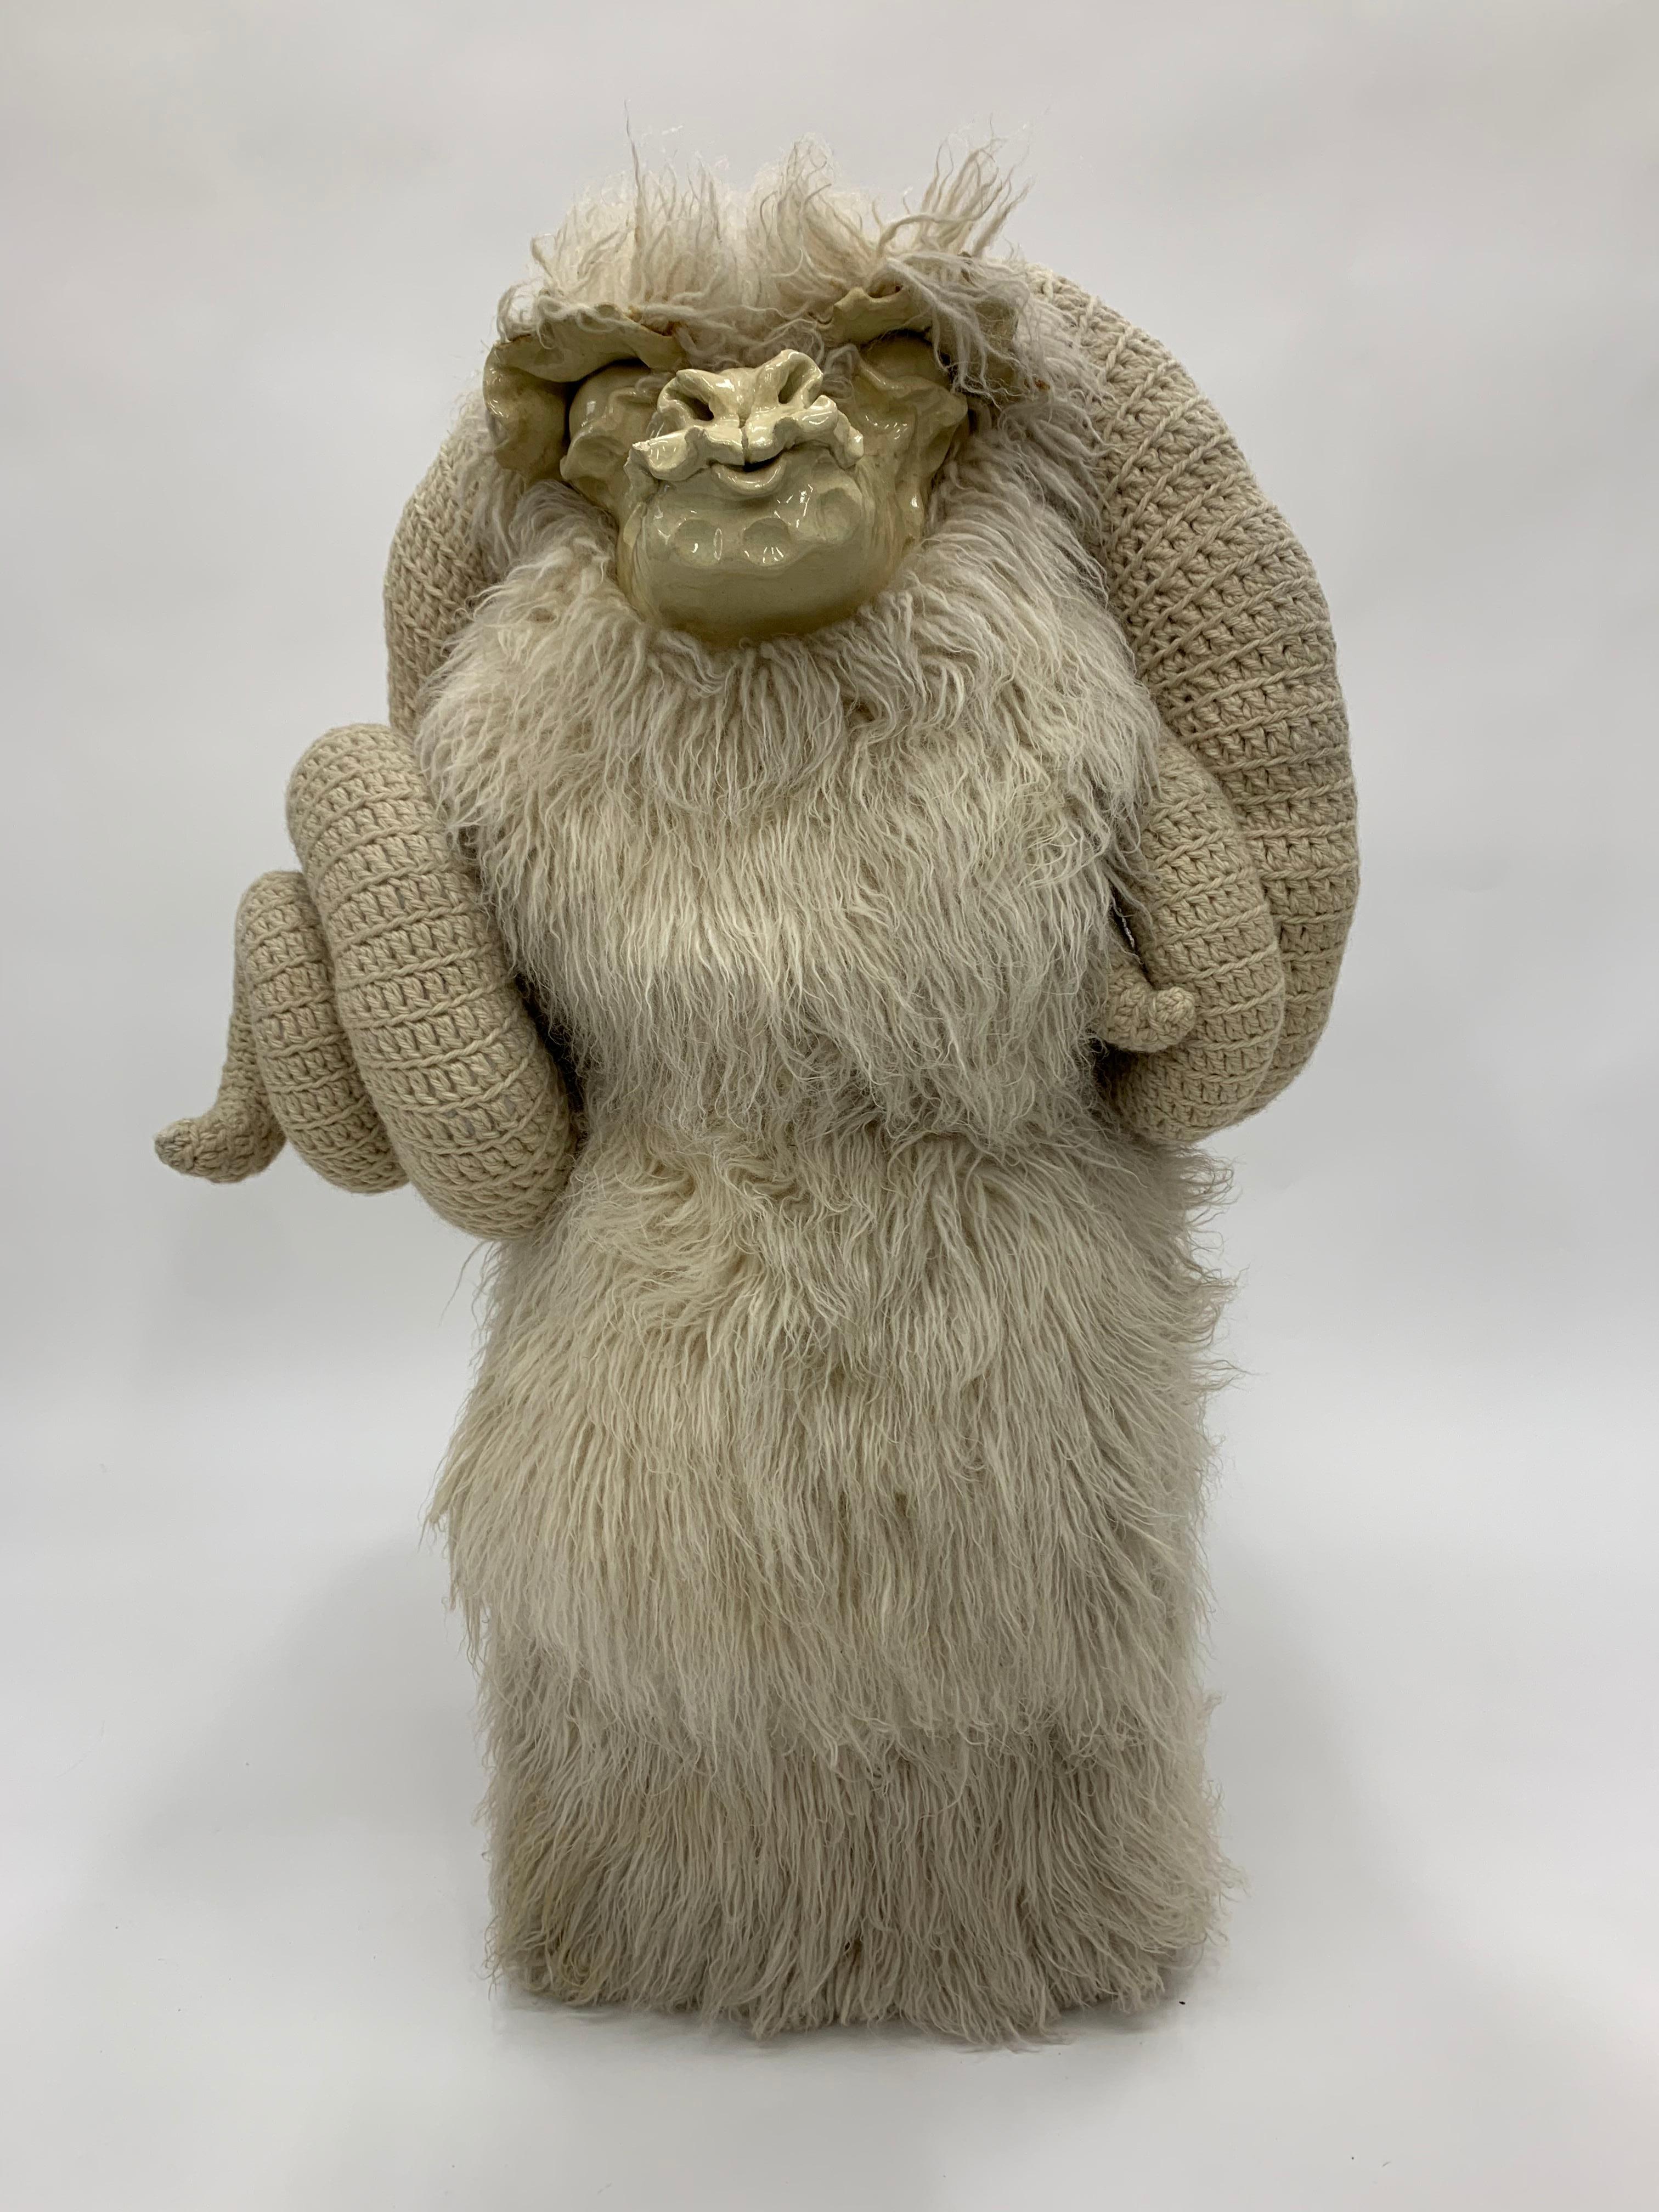 A  rare sculptured bench/ ottoman by artist Edna Cataldo. The artist utilized flocati wool, wood, and ceramic to create a truly unique ram. The face is sculpted ceramic fired with a glazed finish. The curling horns are hand crocheted.
Edna Cataldo